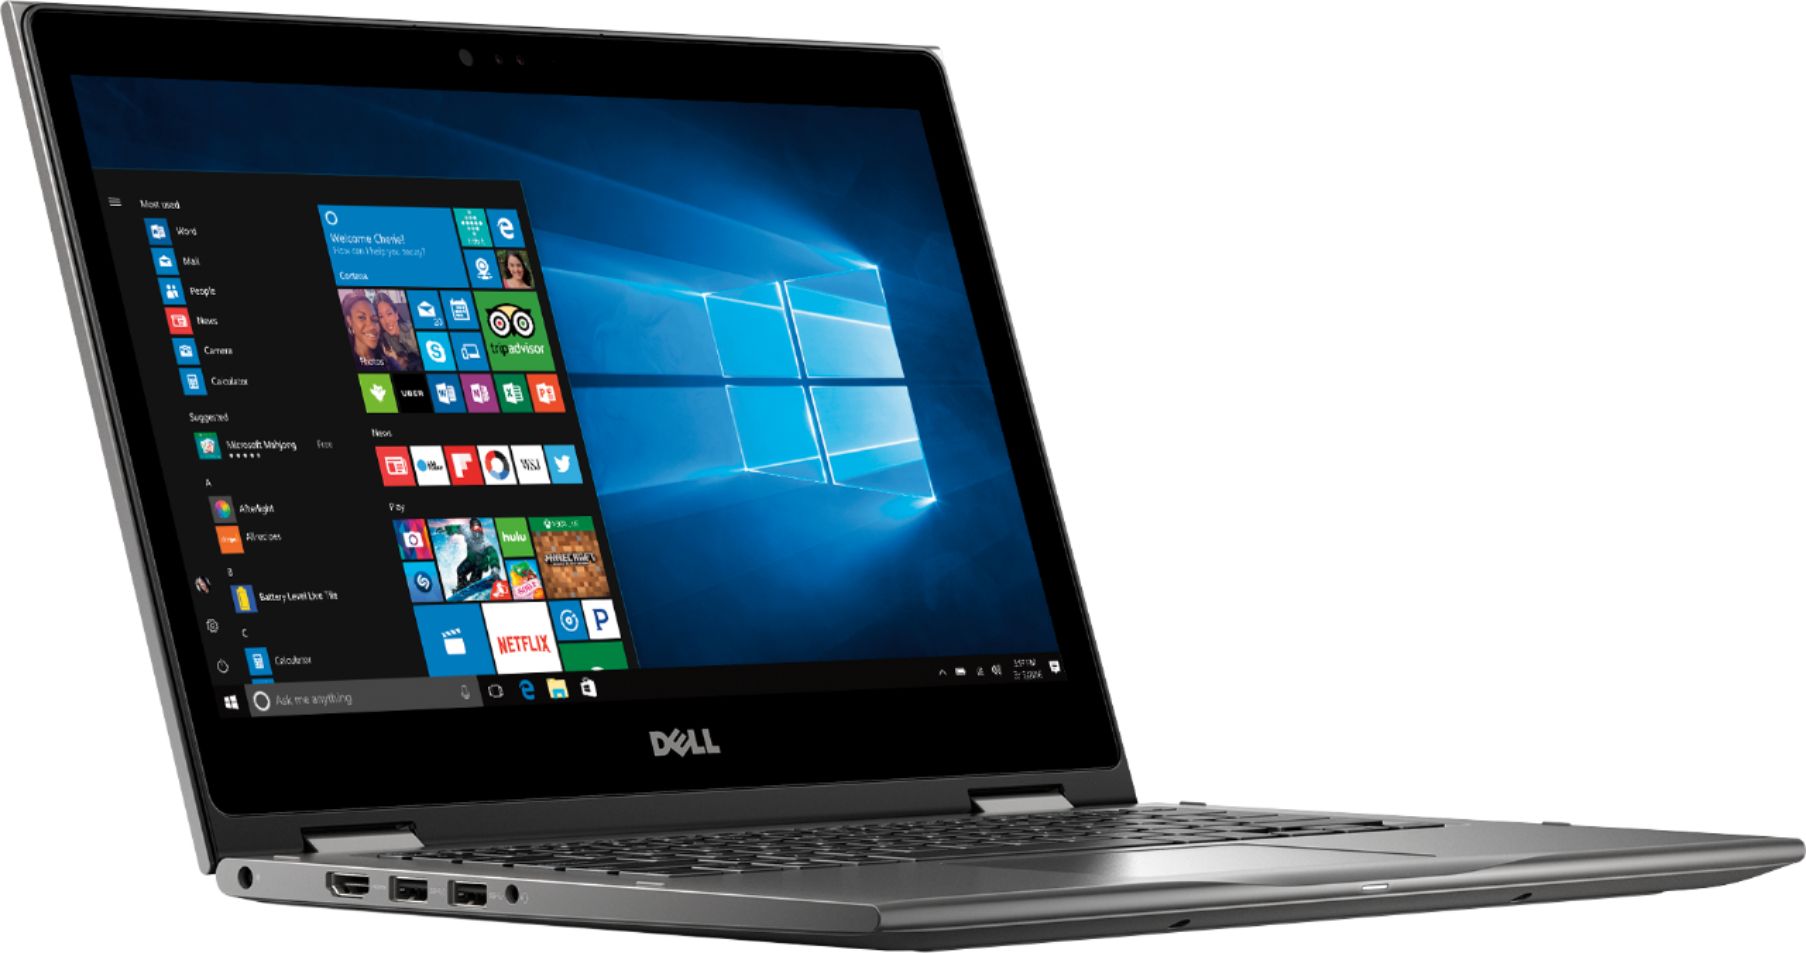 Dell - Inspiron 2-in-1 13.3" Touch-Screen Laptop - AMD Ryzen 5 - 8GB Memory - 256GB Solid State Drive - Era Gray